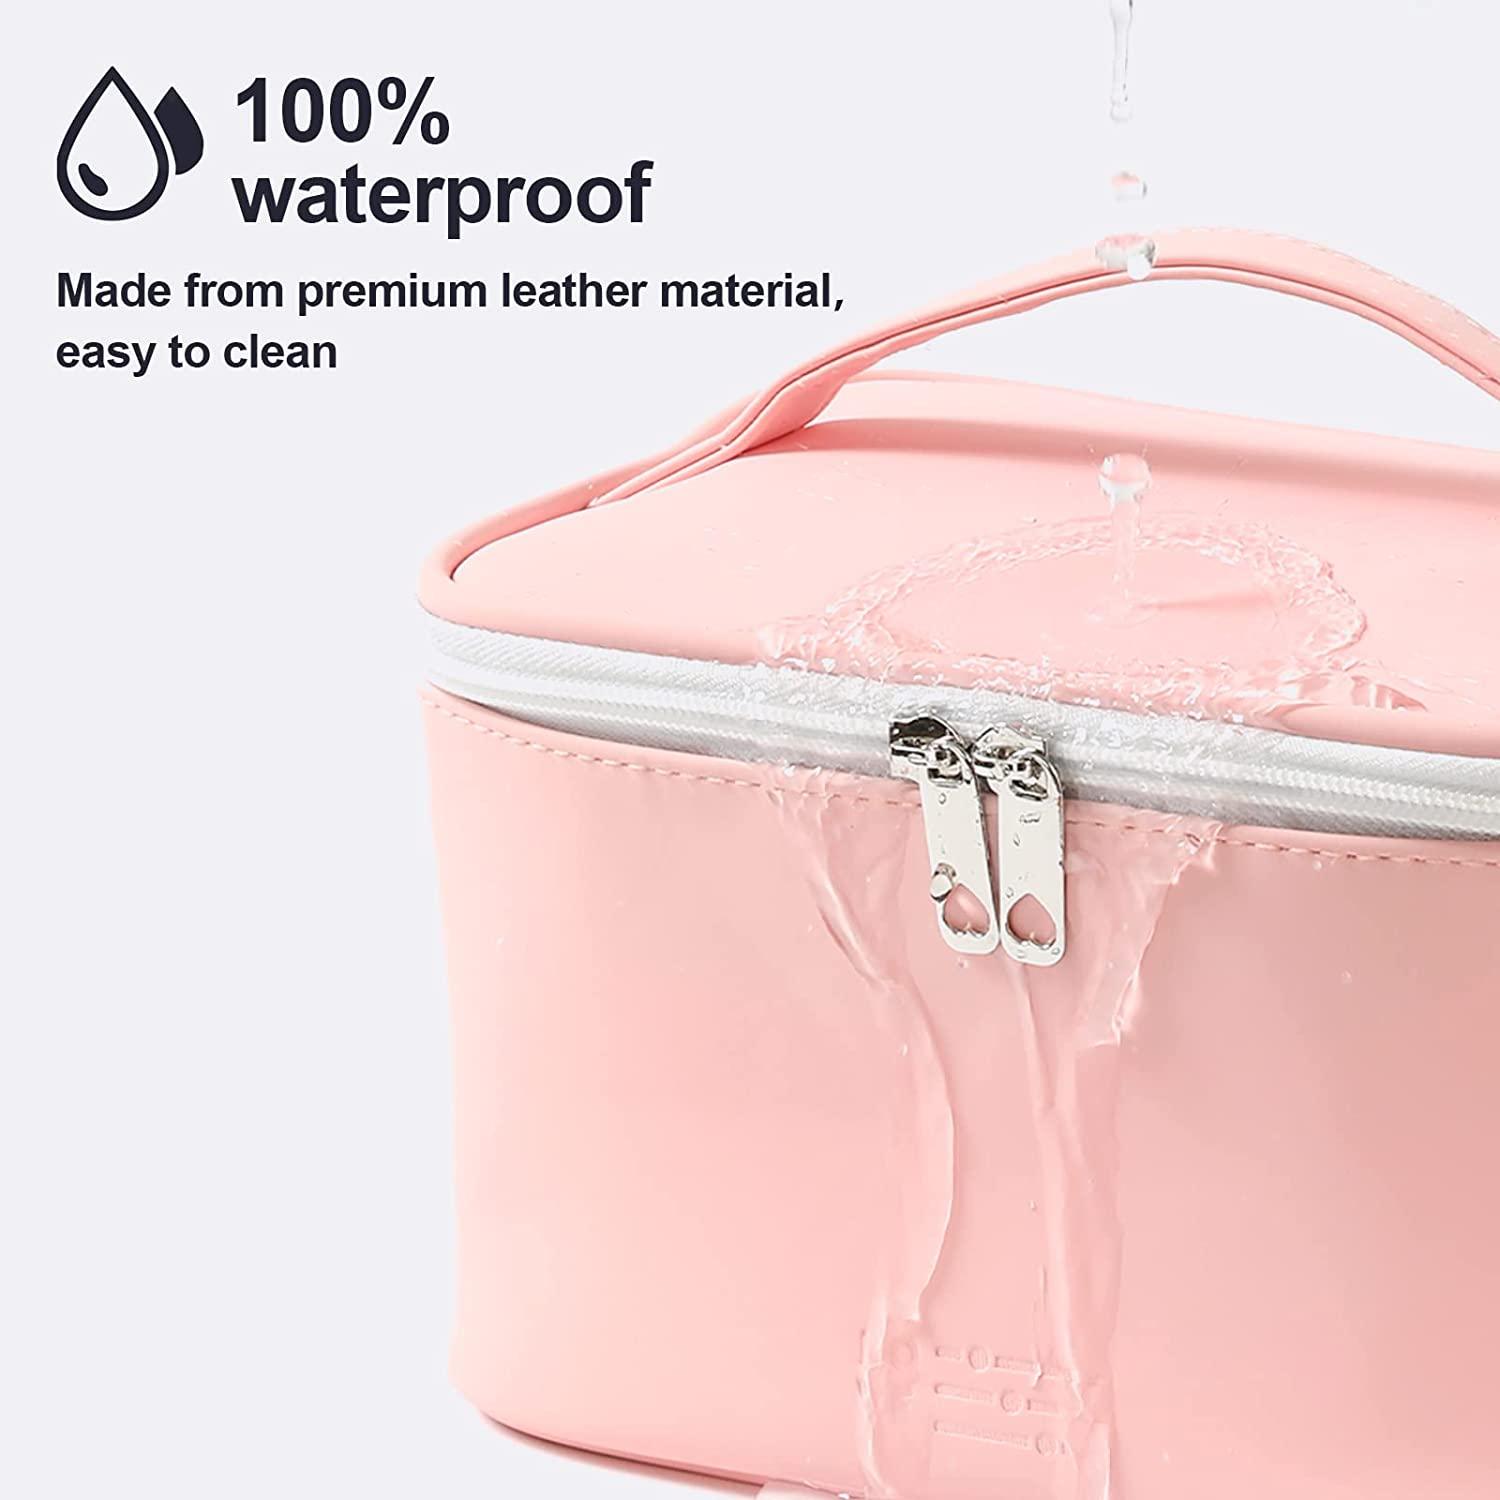  yisinuoo Large Makeup Zipper Pouch Cute Portable Travel Cosmetic  Organizer for Women and Girls (Pink) : Beauty & Personal Care